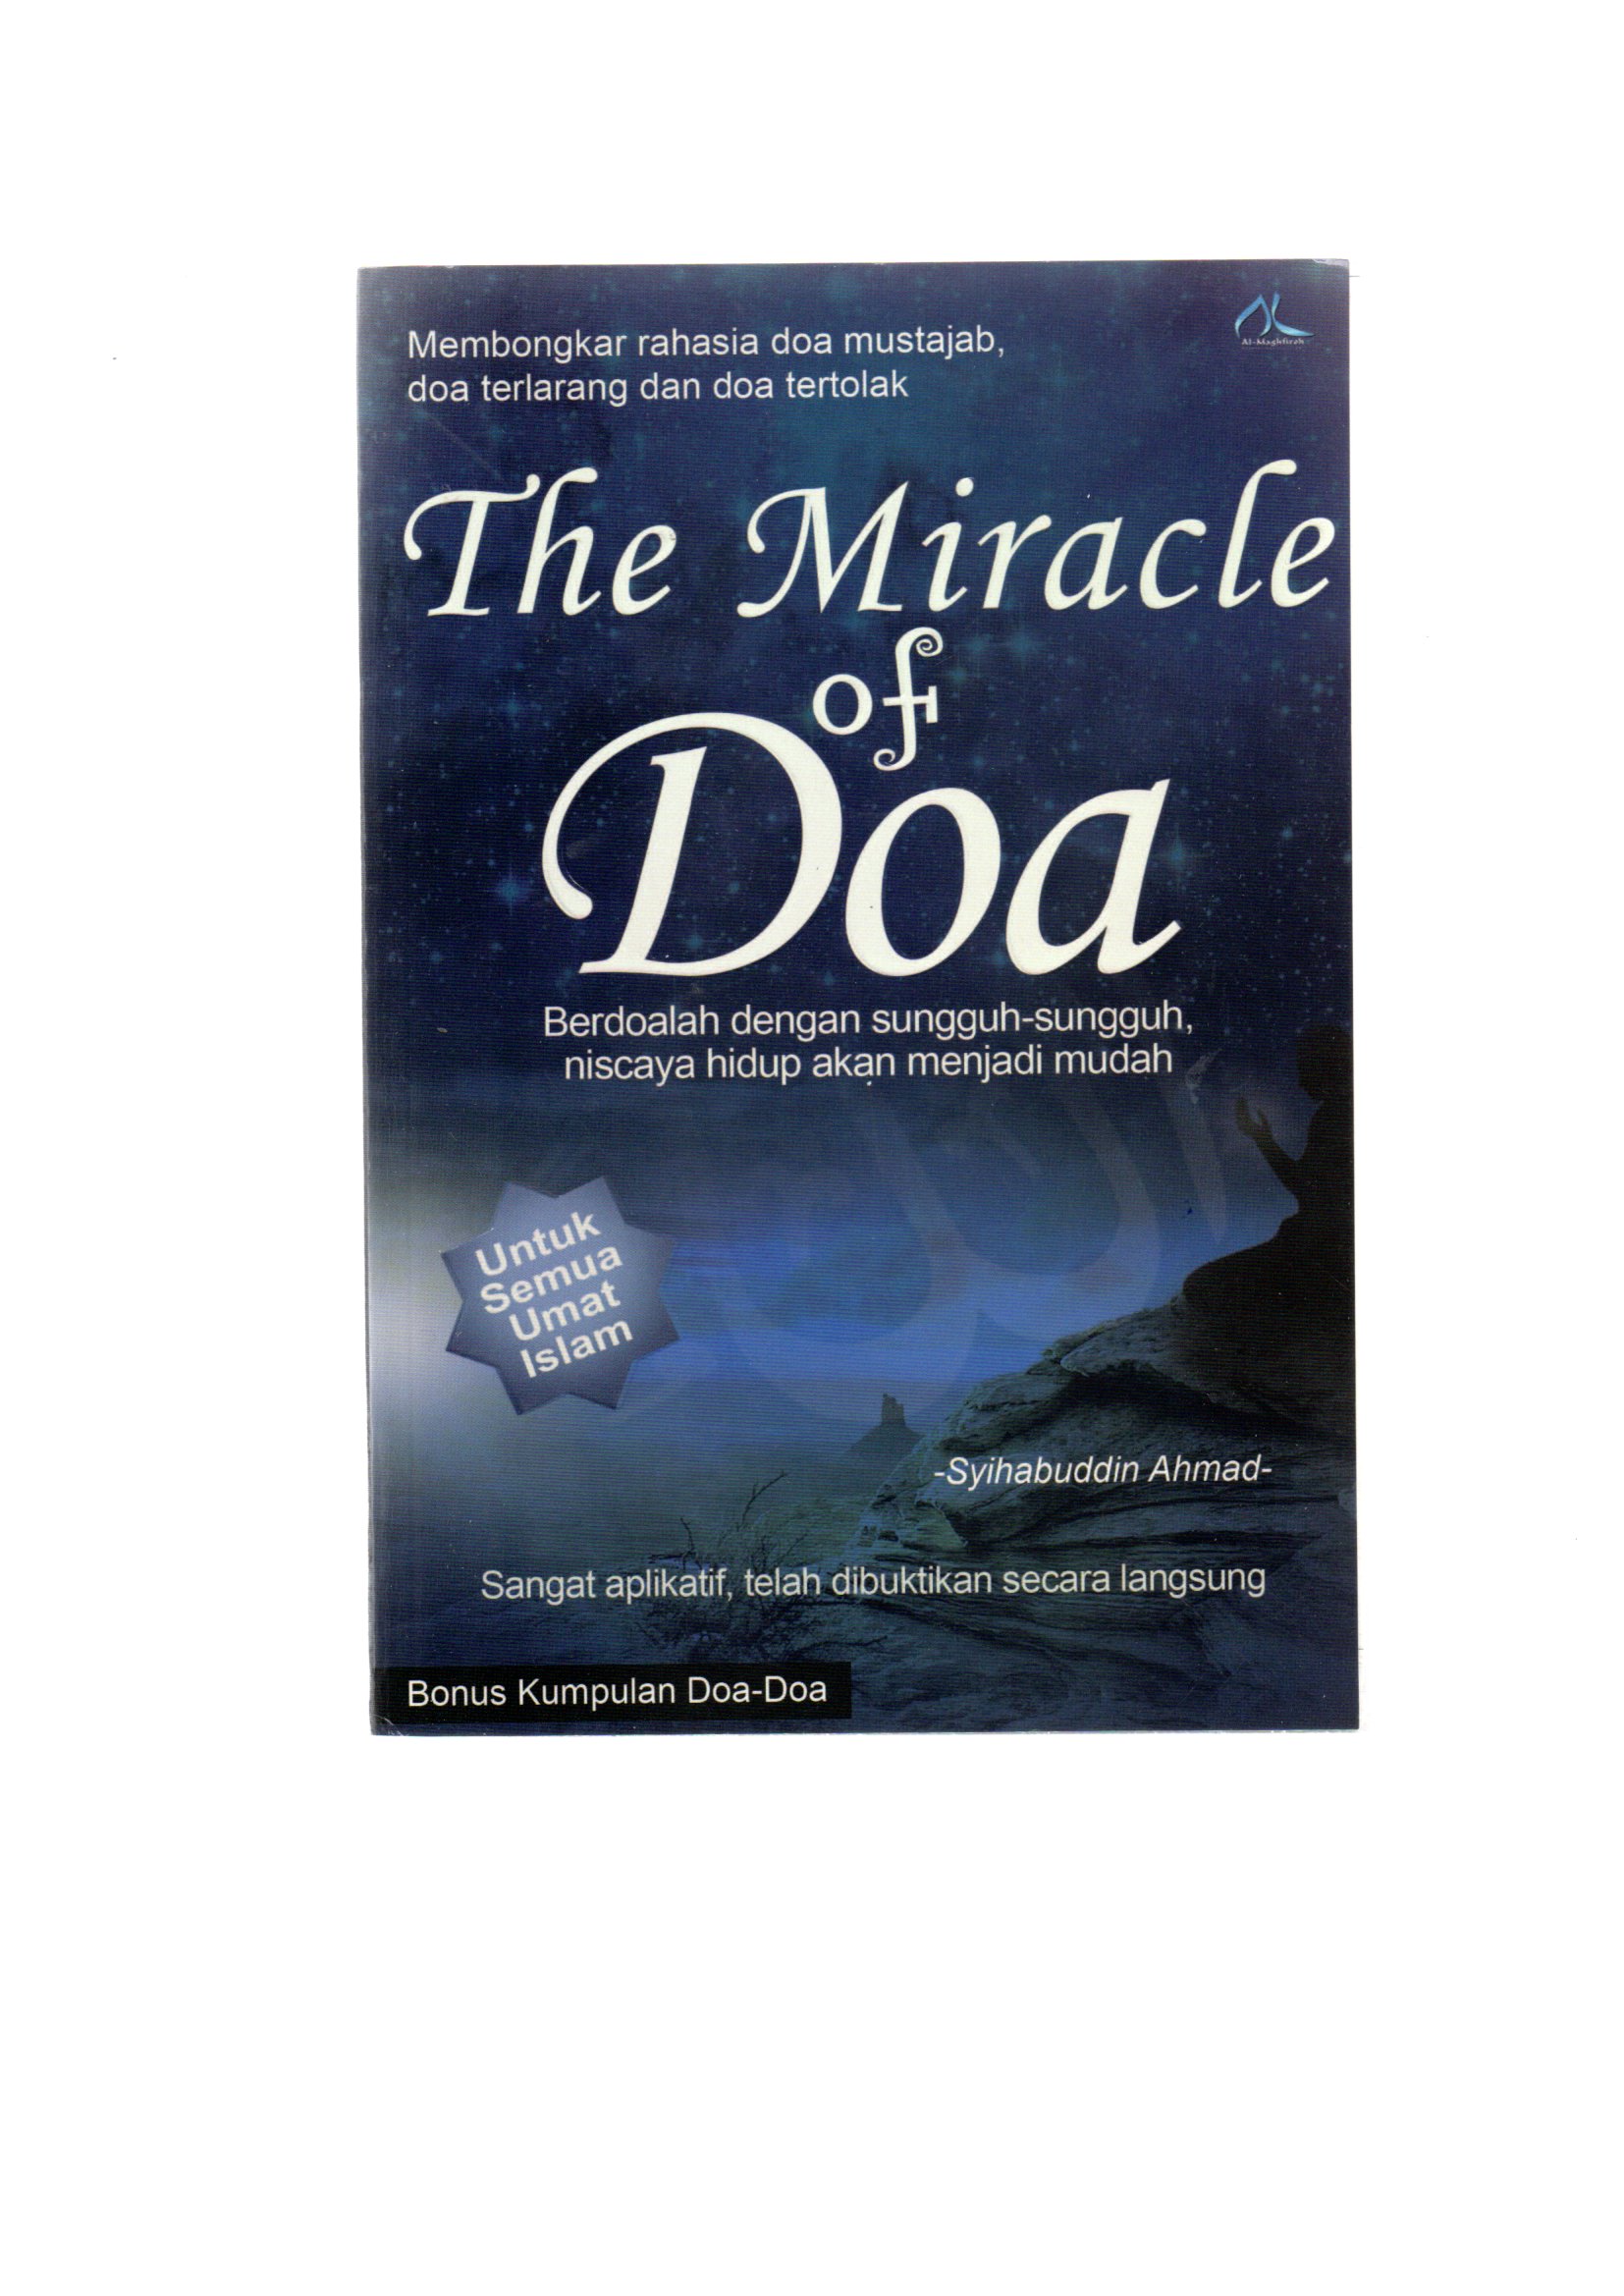 The miracle of doa